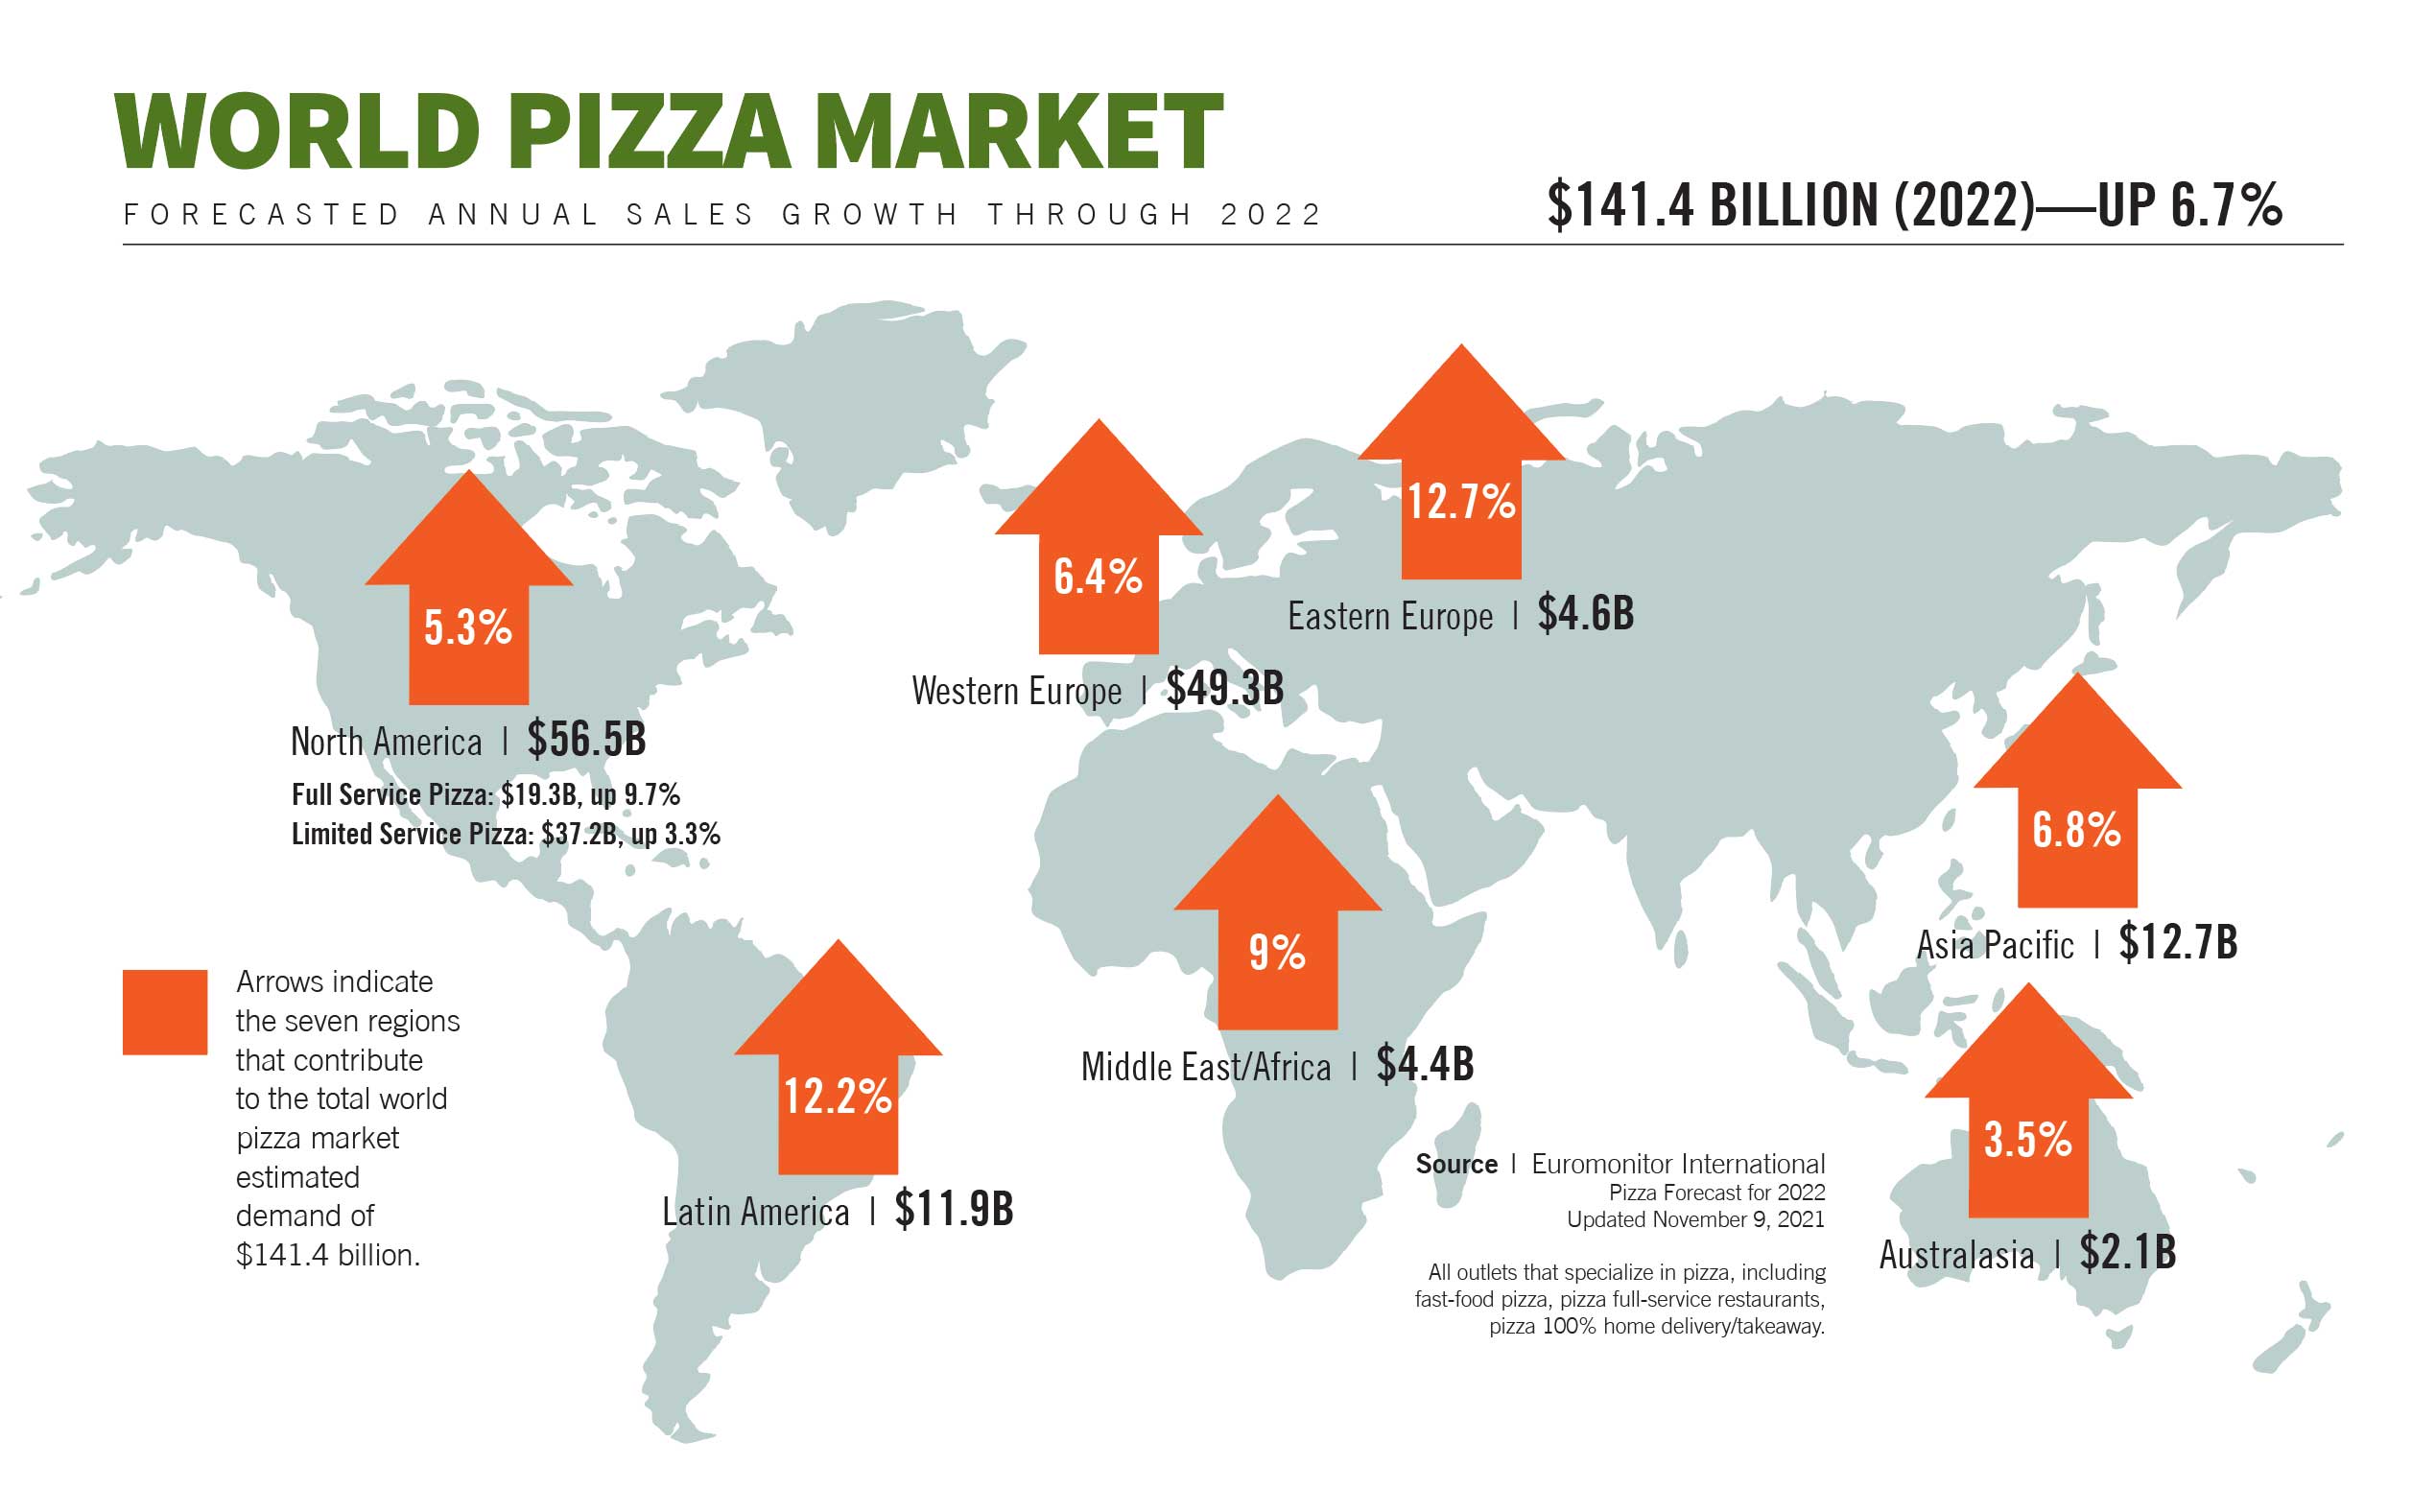 Why is the price of a pizza in the US higher than in Europe or